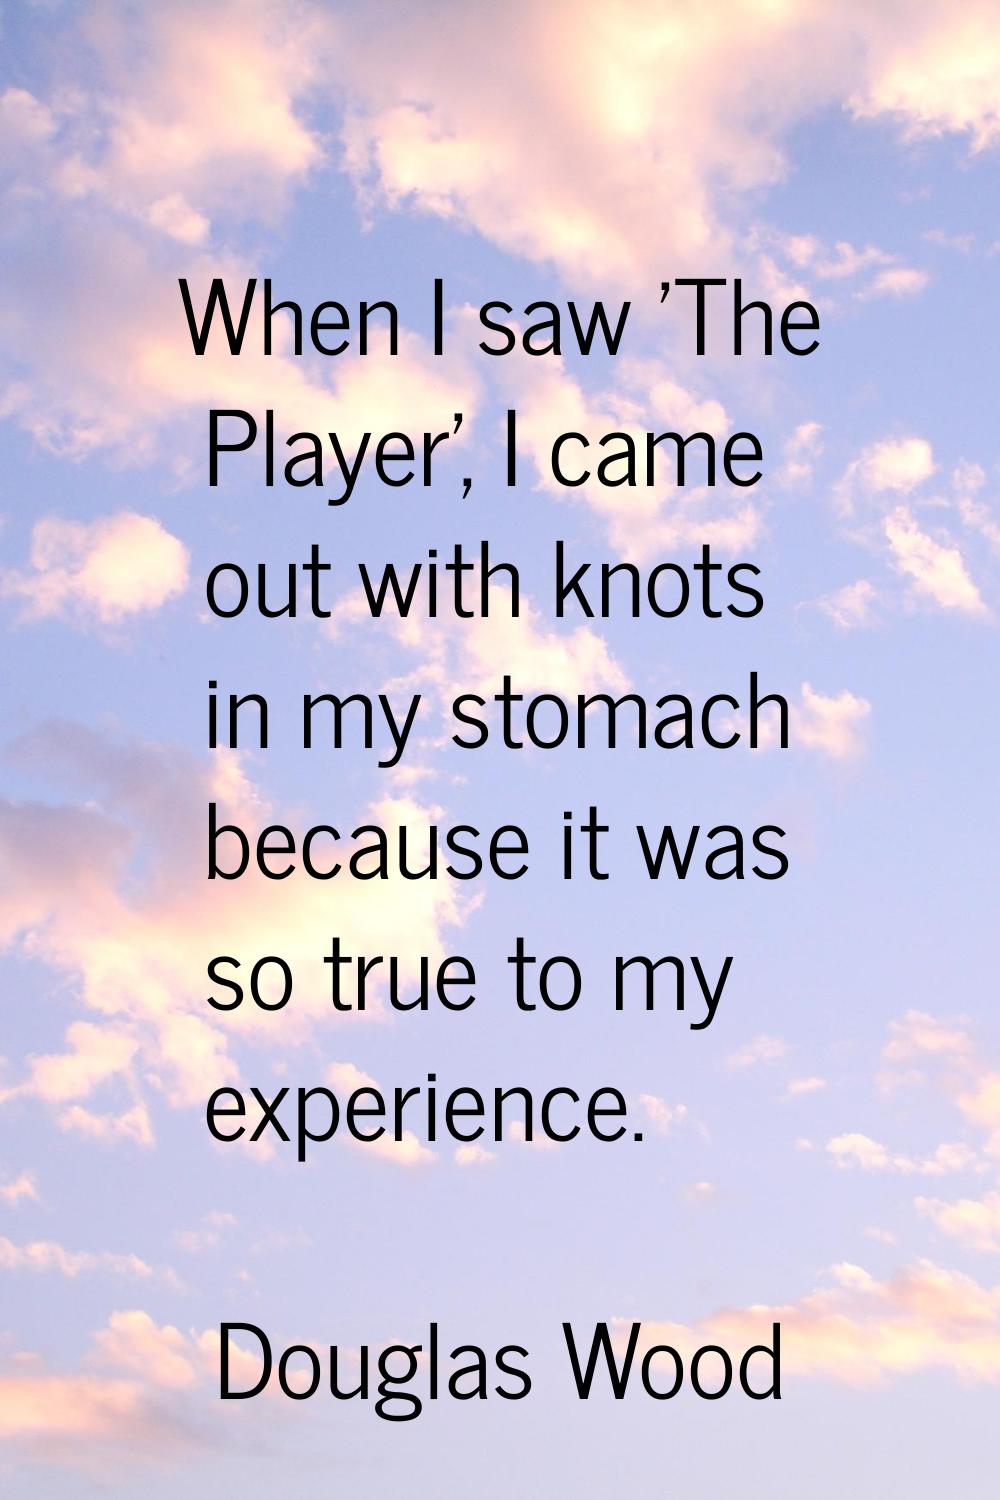 When I saw 'The Player', I came out with knots in my stomach because it was so true to my experienc